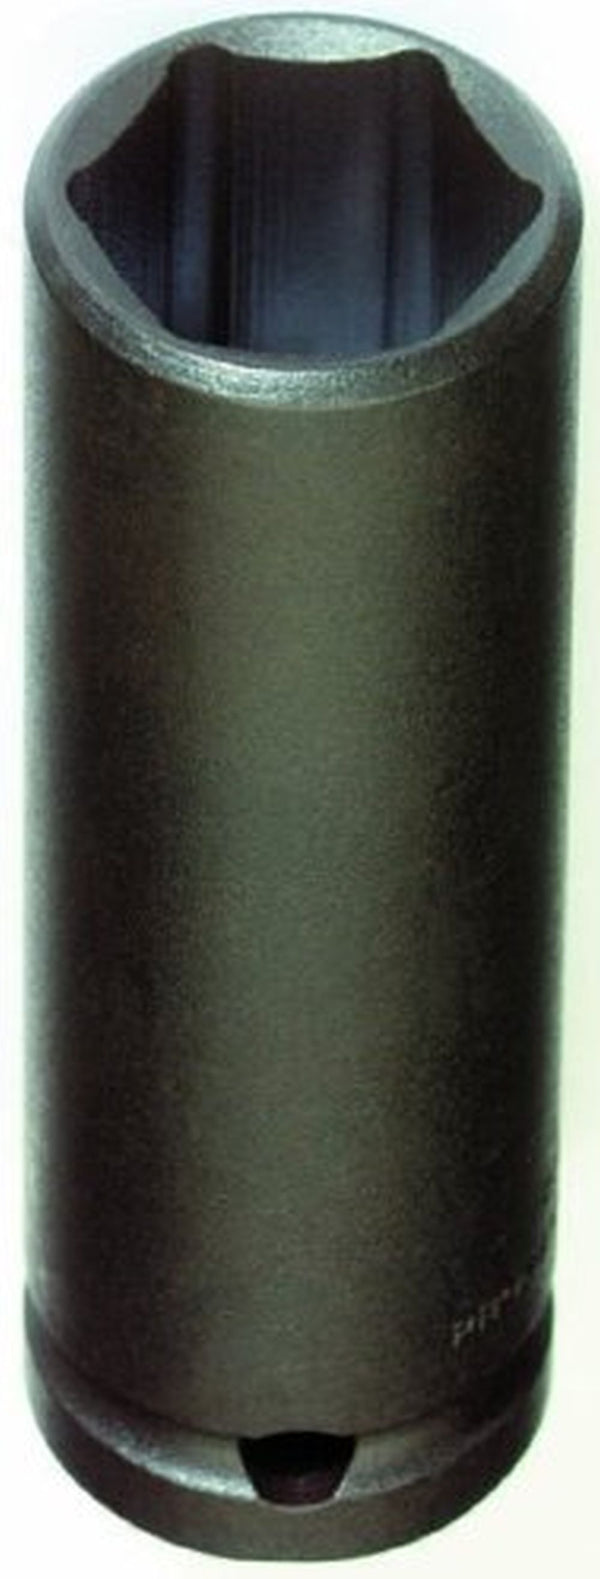 Stanley Proto J7320HT 1/2 in. Drive 6 Point 5/8 in. SAE Thin Wall Deep Impact Socket